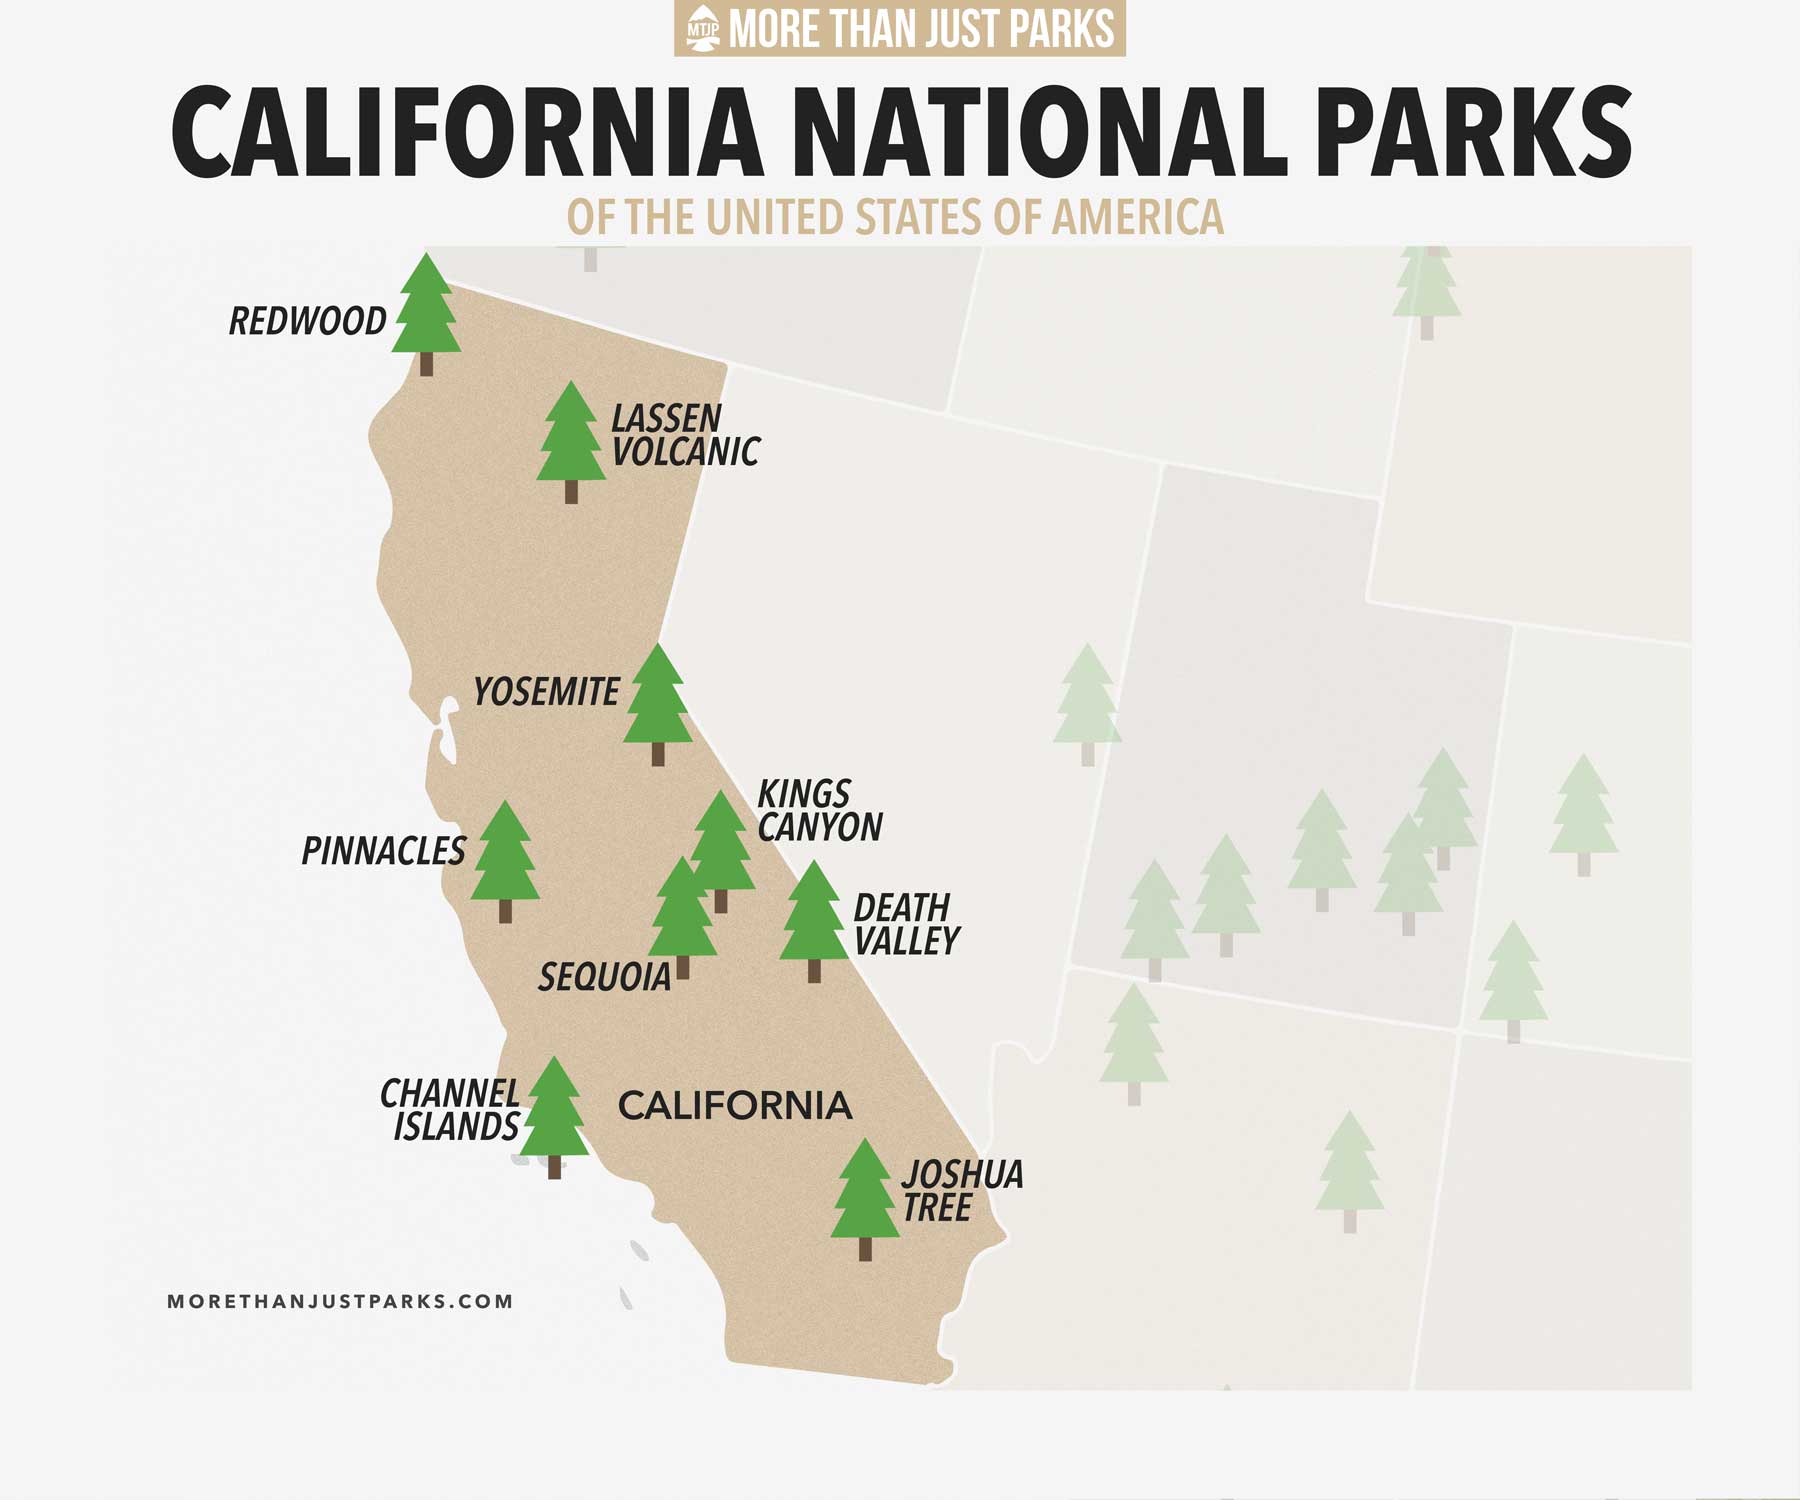 california national parks map, map of california national parks